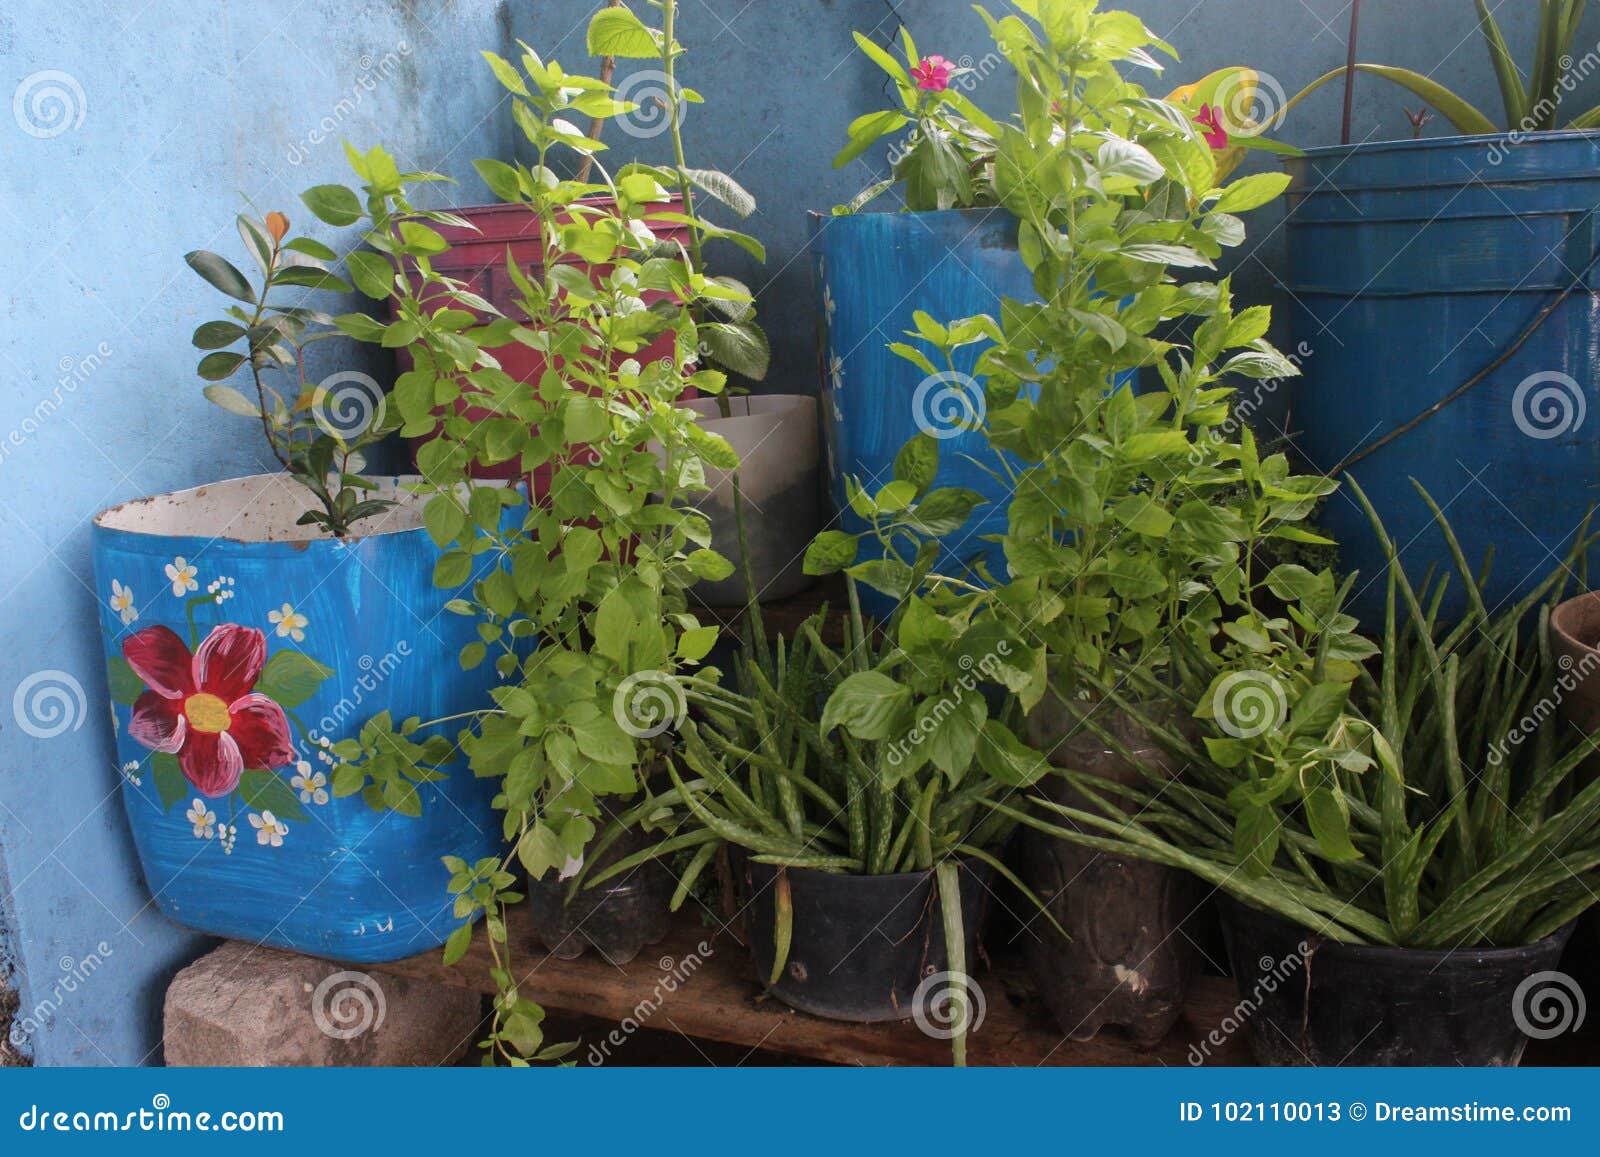 flower pots and leaves